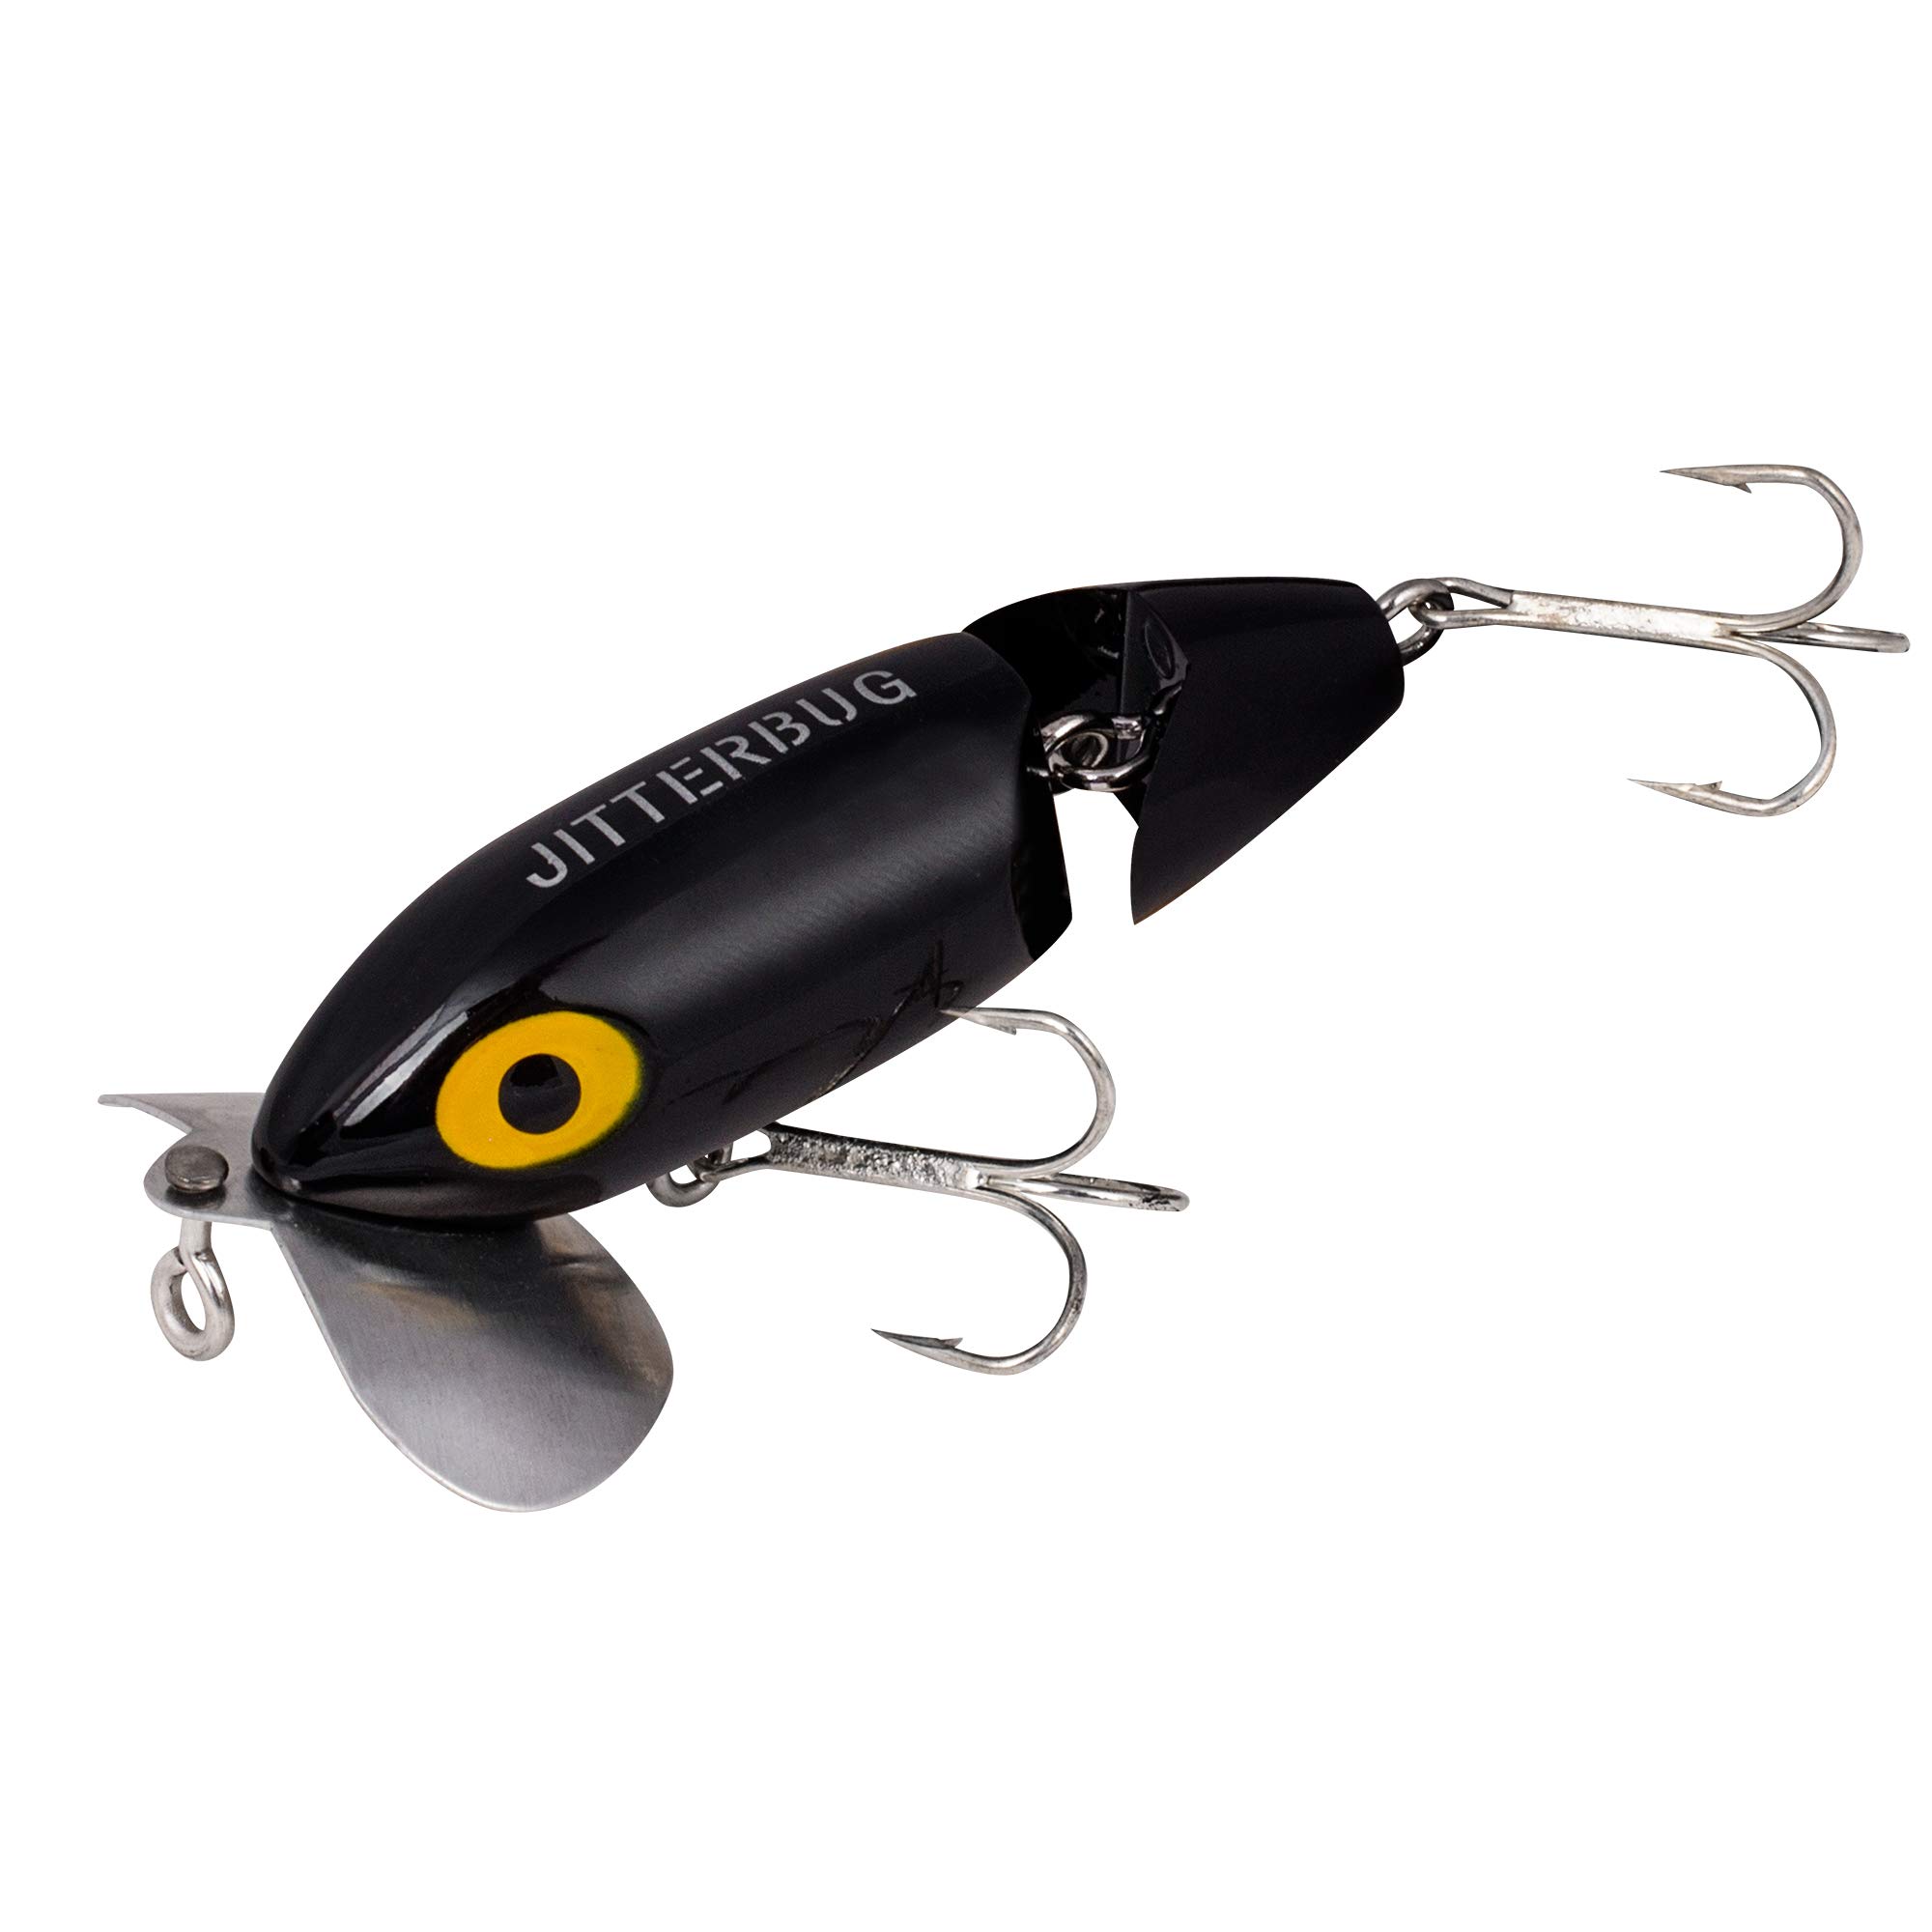 Arbogast Jitterbug Topwater Bass Fishing Lure - Excellent for Night Fishing  G650 (3 in, 5/8 oz)